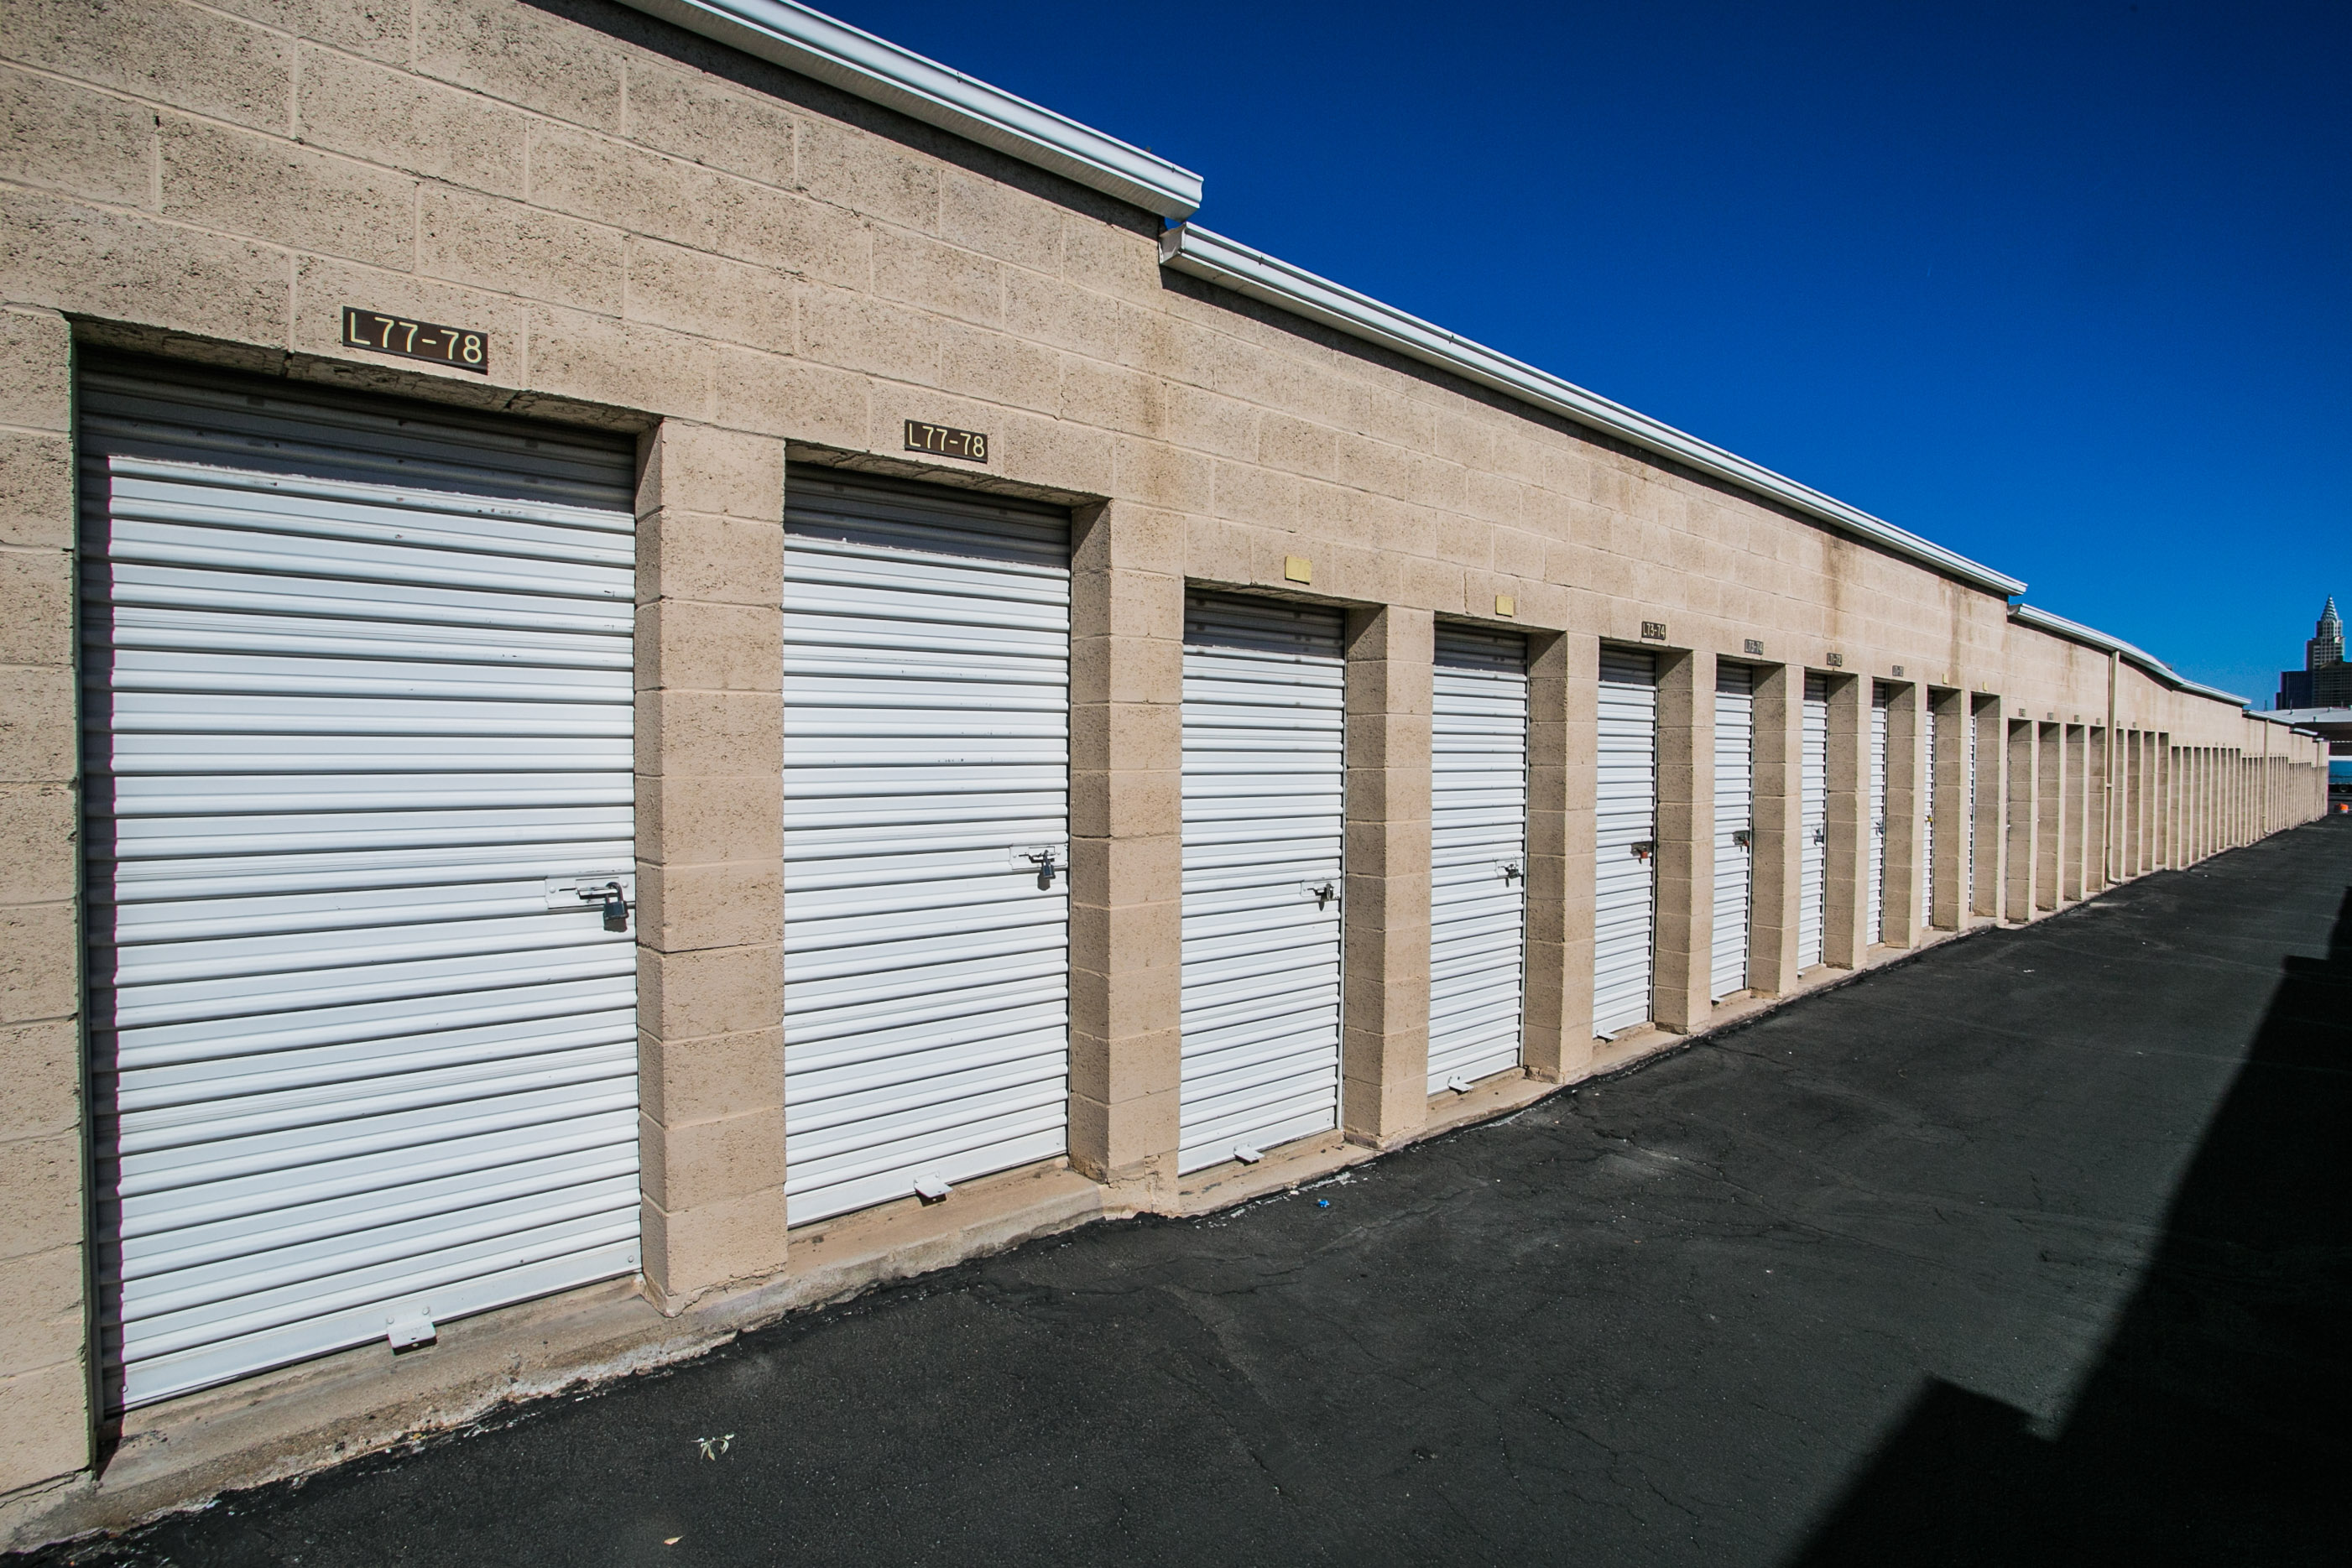 Find Las Vegas outdoor RV and vehicle parking with economical self storage units at IPI Self Storage today. Drive-up access, security cameras, and more.